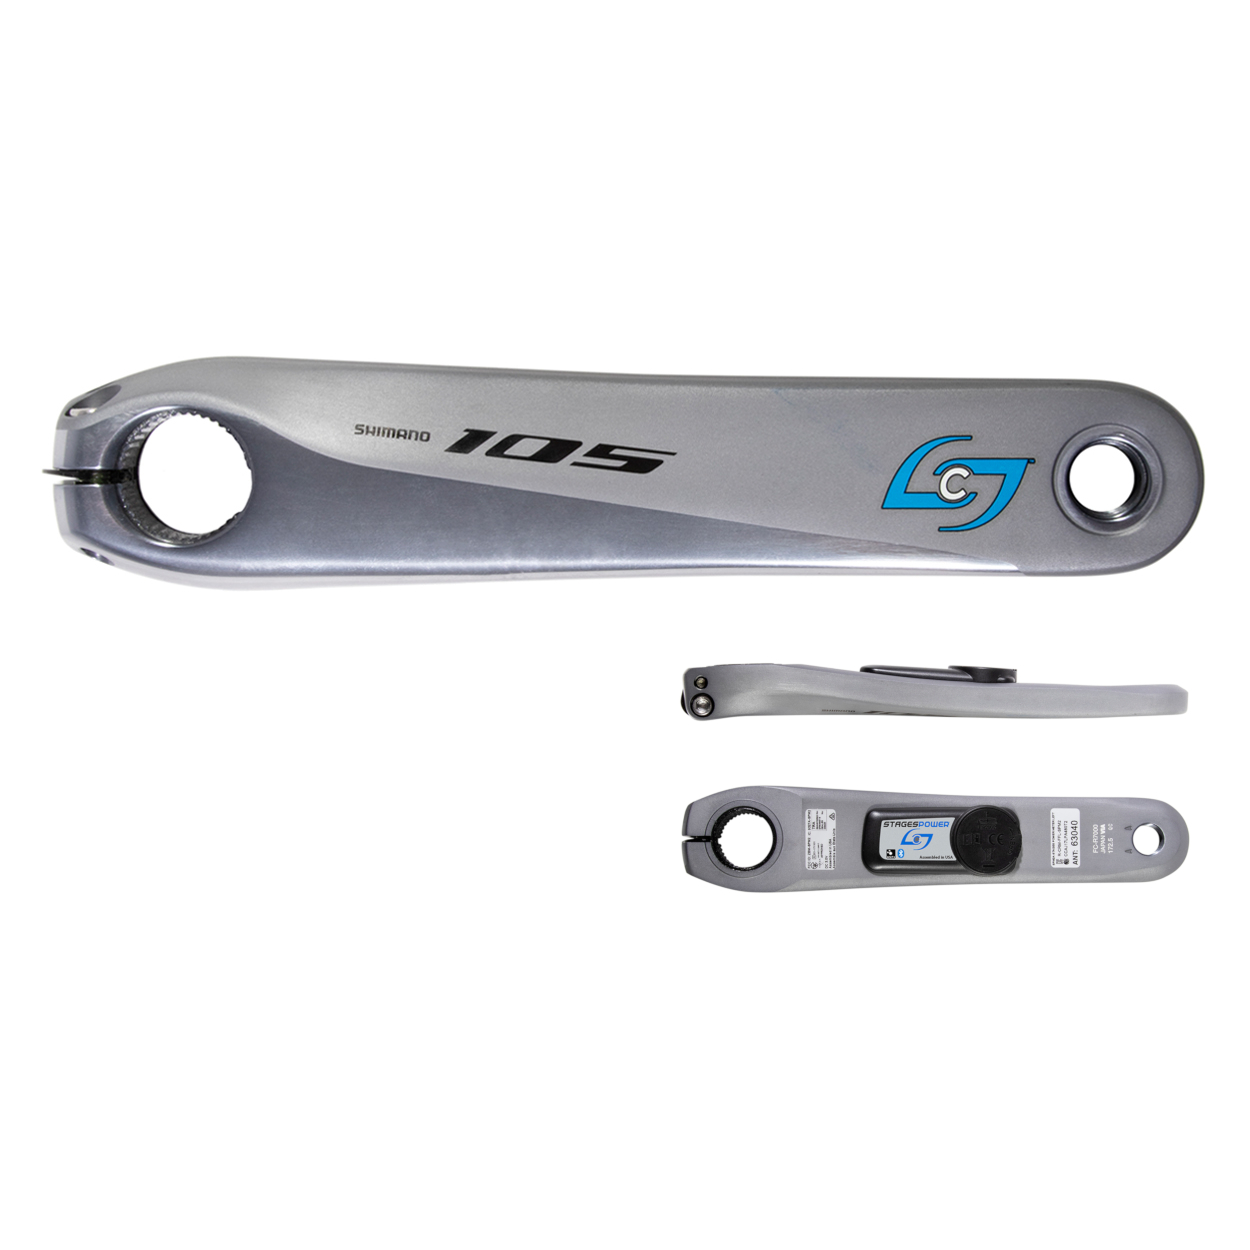 Productfoto van Stages Cycling Power L Powermeter | Crank Arm by Shimano - 105 R7000 - silver